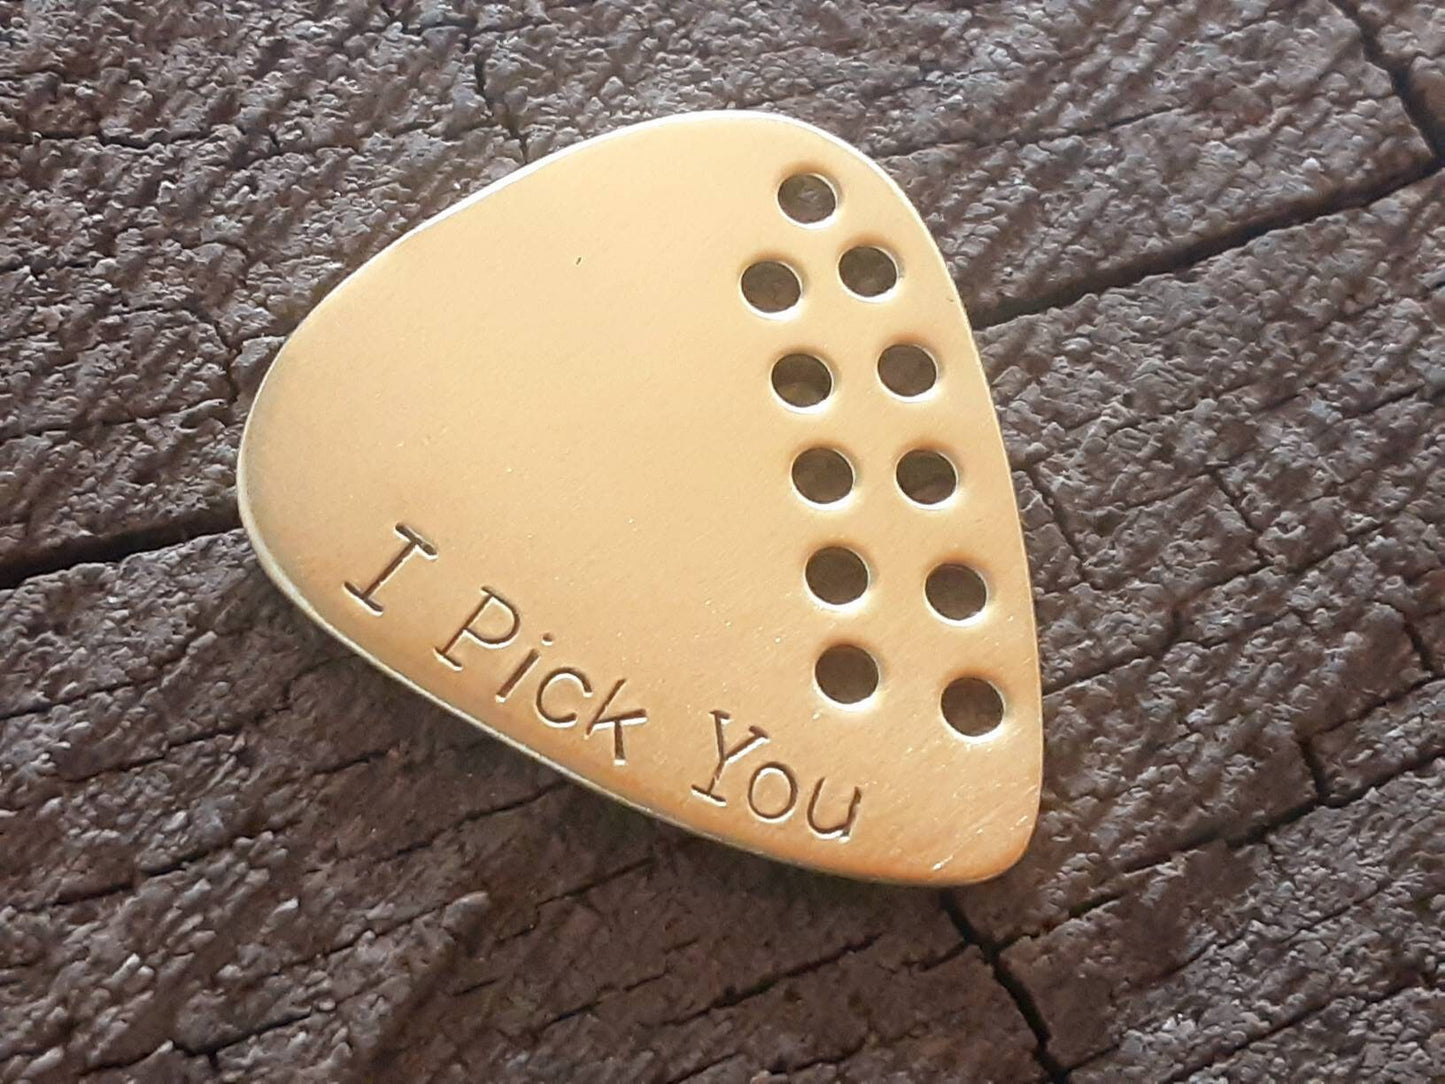 I pick you brass guitar pick with hole design